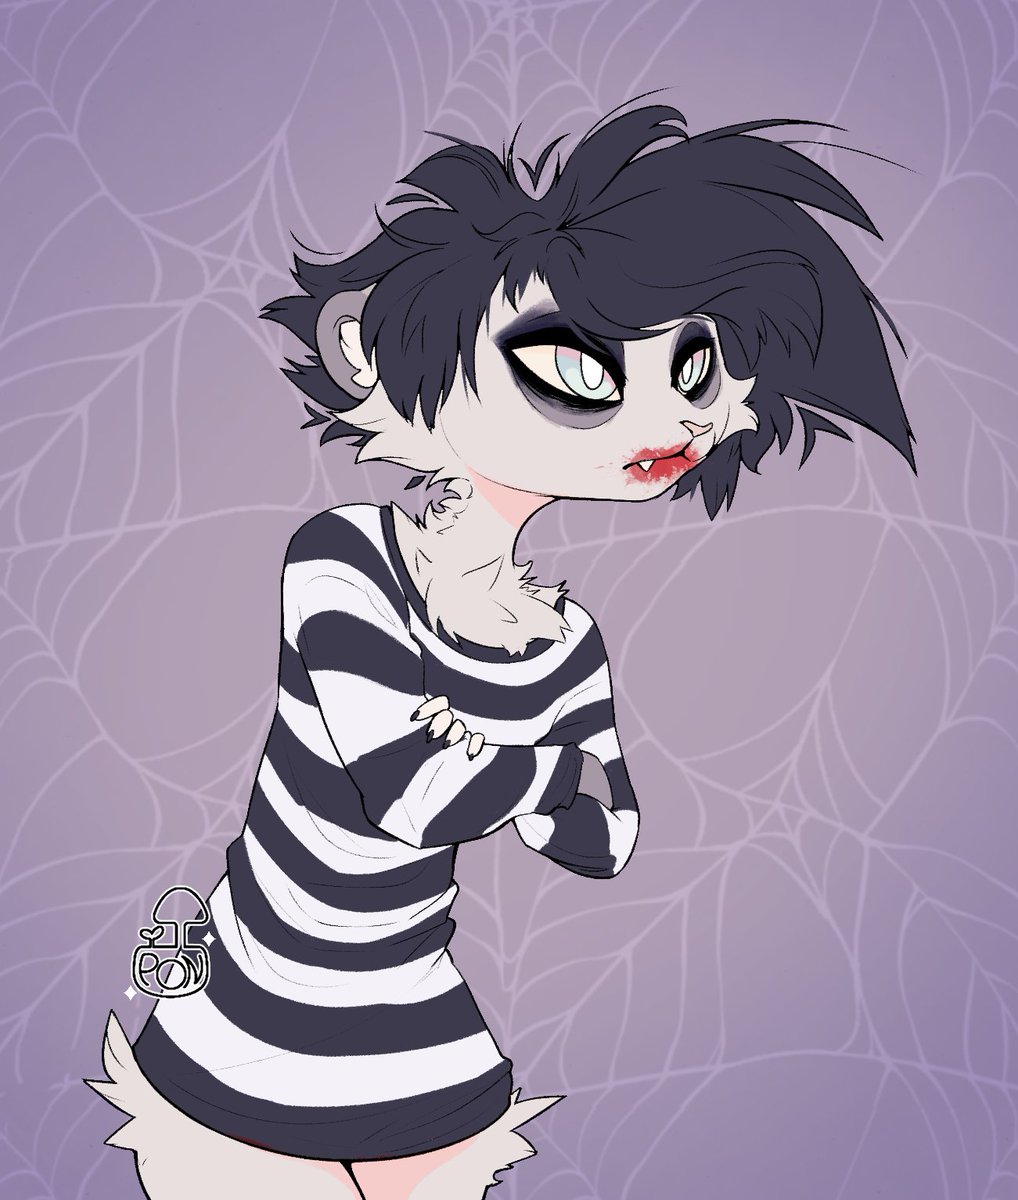 My patrons gave me the opportunity to live out my childhood dream of being Robert Smith. 🦇
When I was a kid I wished to be like him, but couldn’t because I was stuck in a girl’s body.
That’s not going to be the case for much longer.
#furryart #furry #thecure #robertsmith #goth